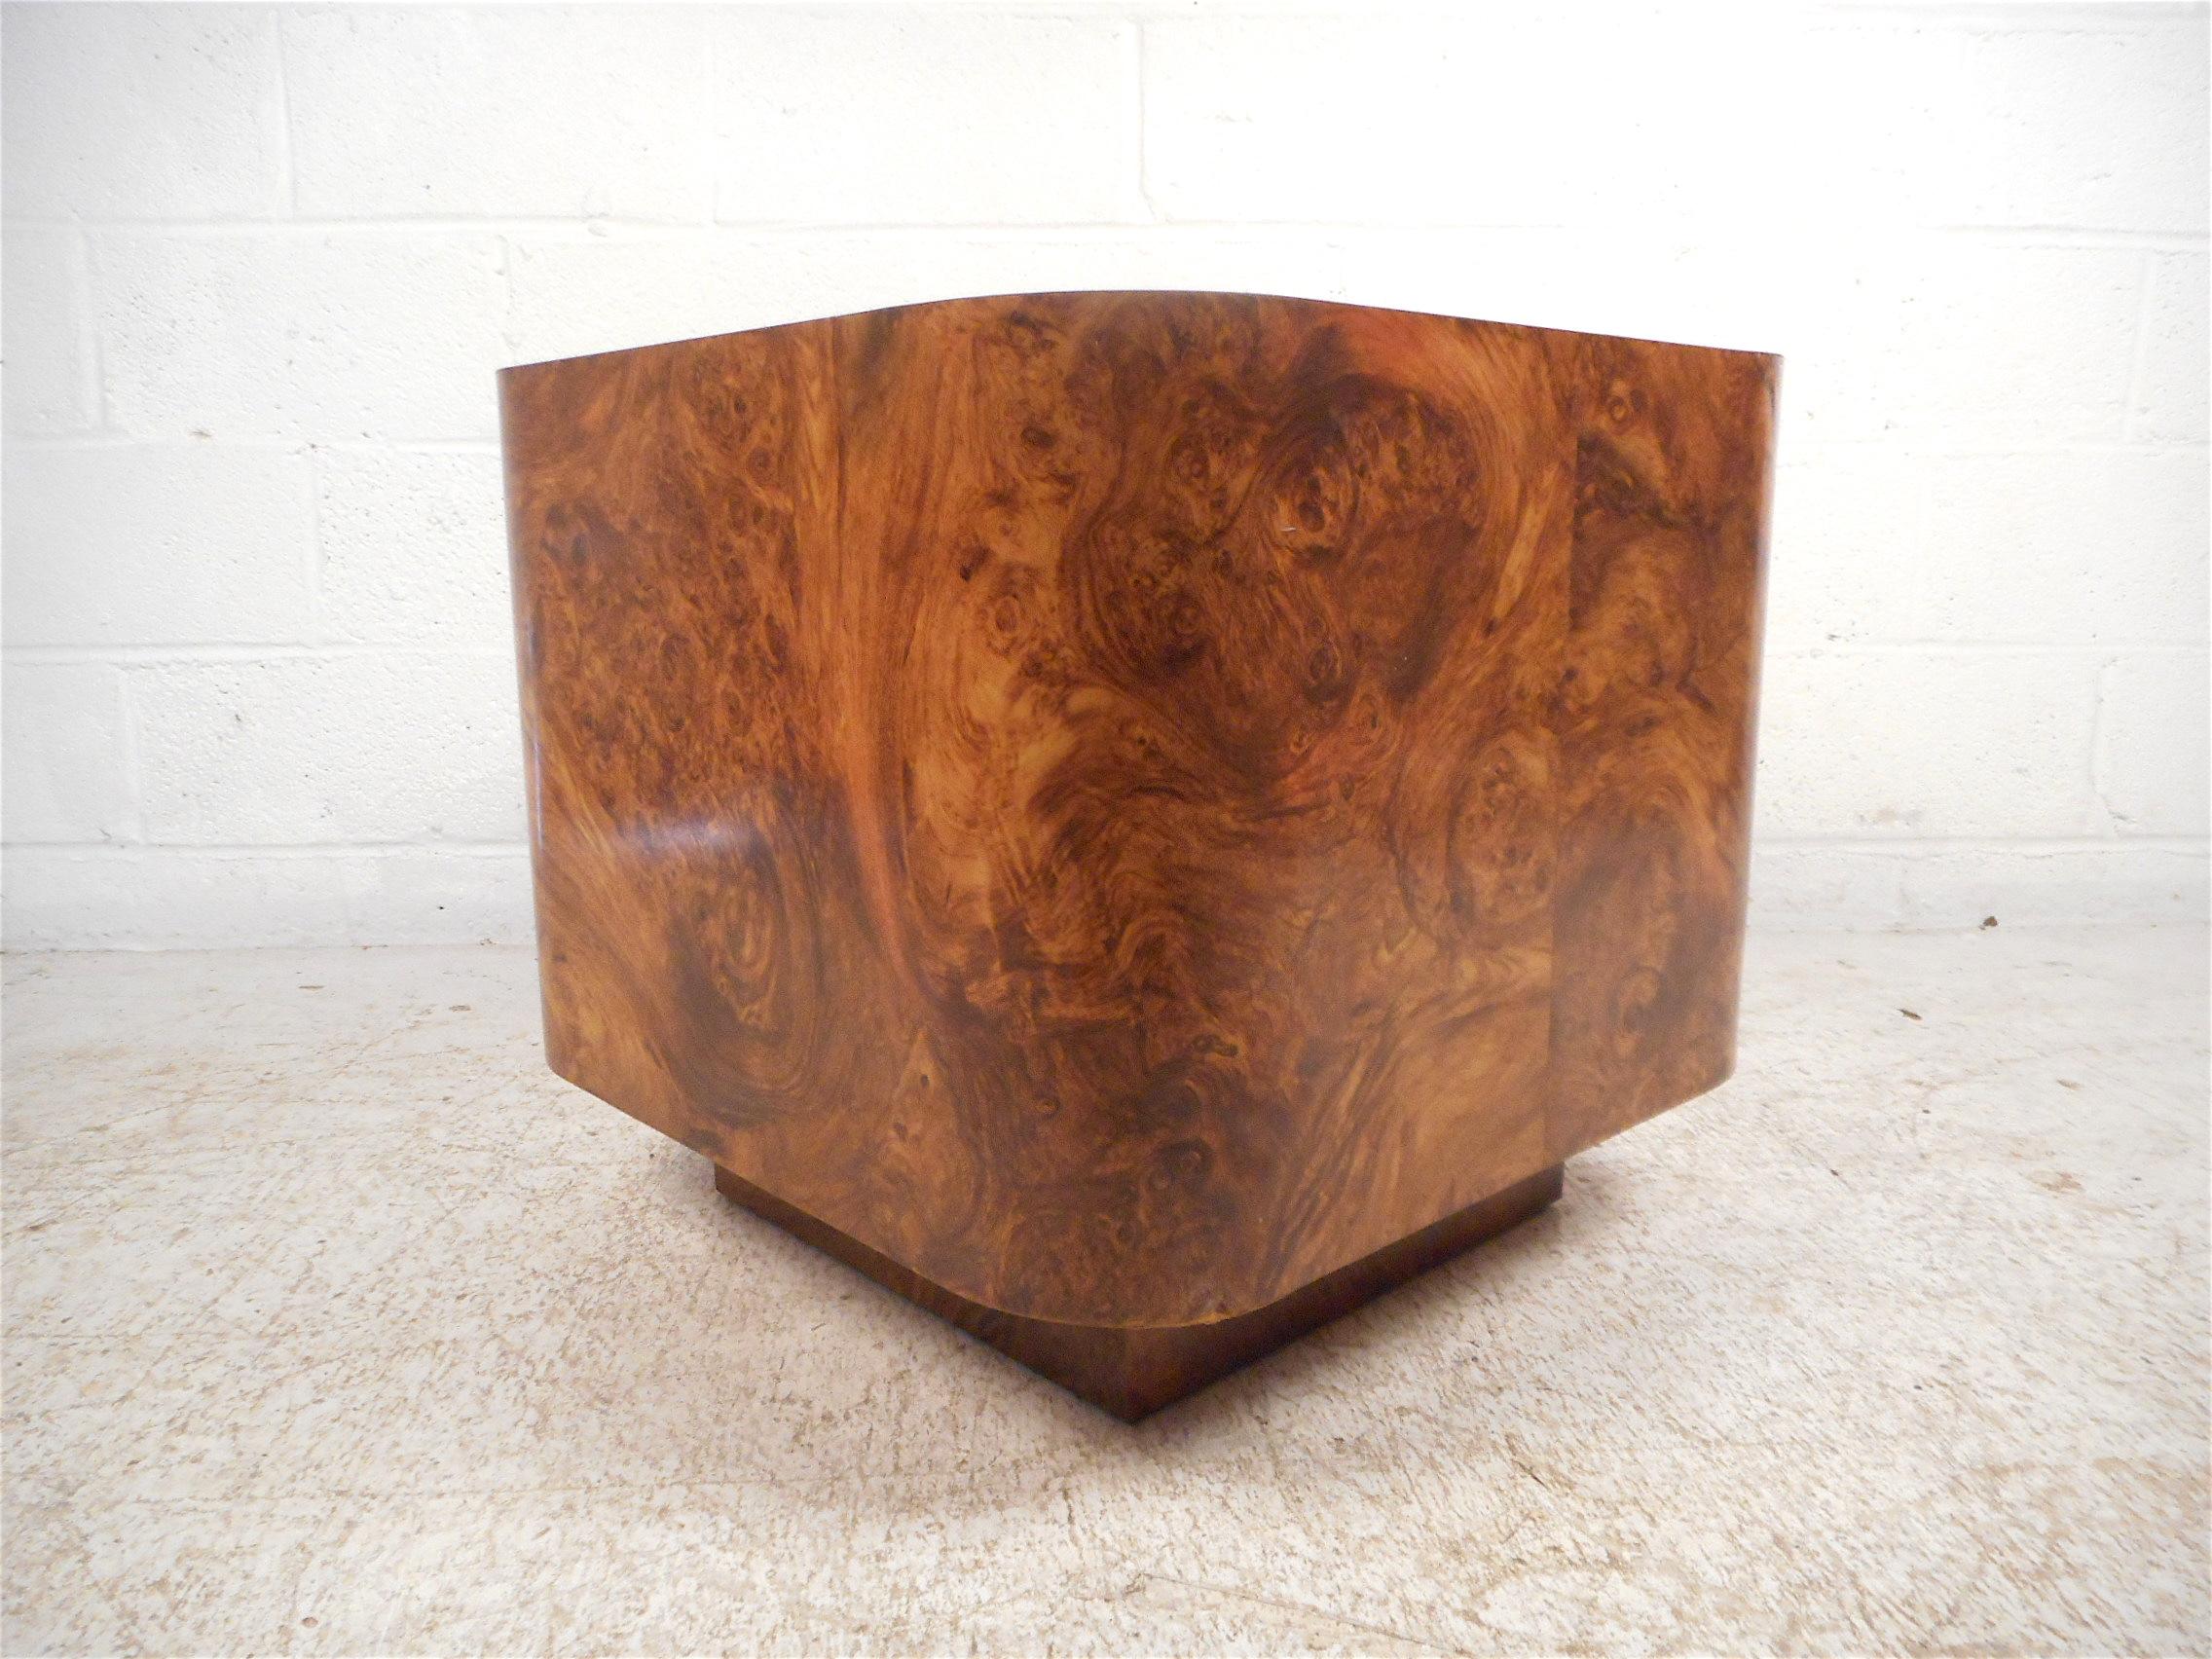 Impressive midcentury burl wood table. Sturdy and stylish, with beautiful burl wood grain throughout. Tabletop is square with rounded edges. Great addition to any modern interior. Please confirm item location with dealer (NJ or NY).